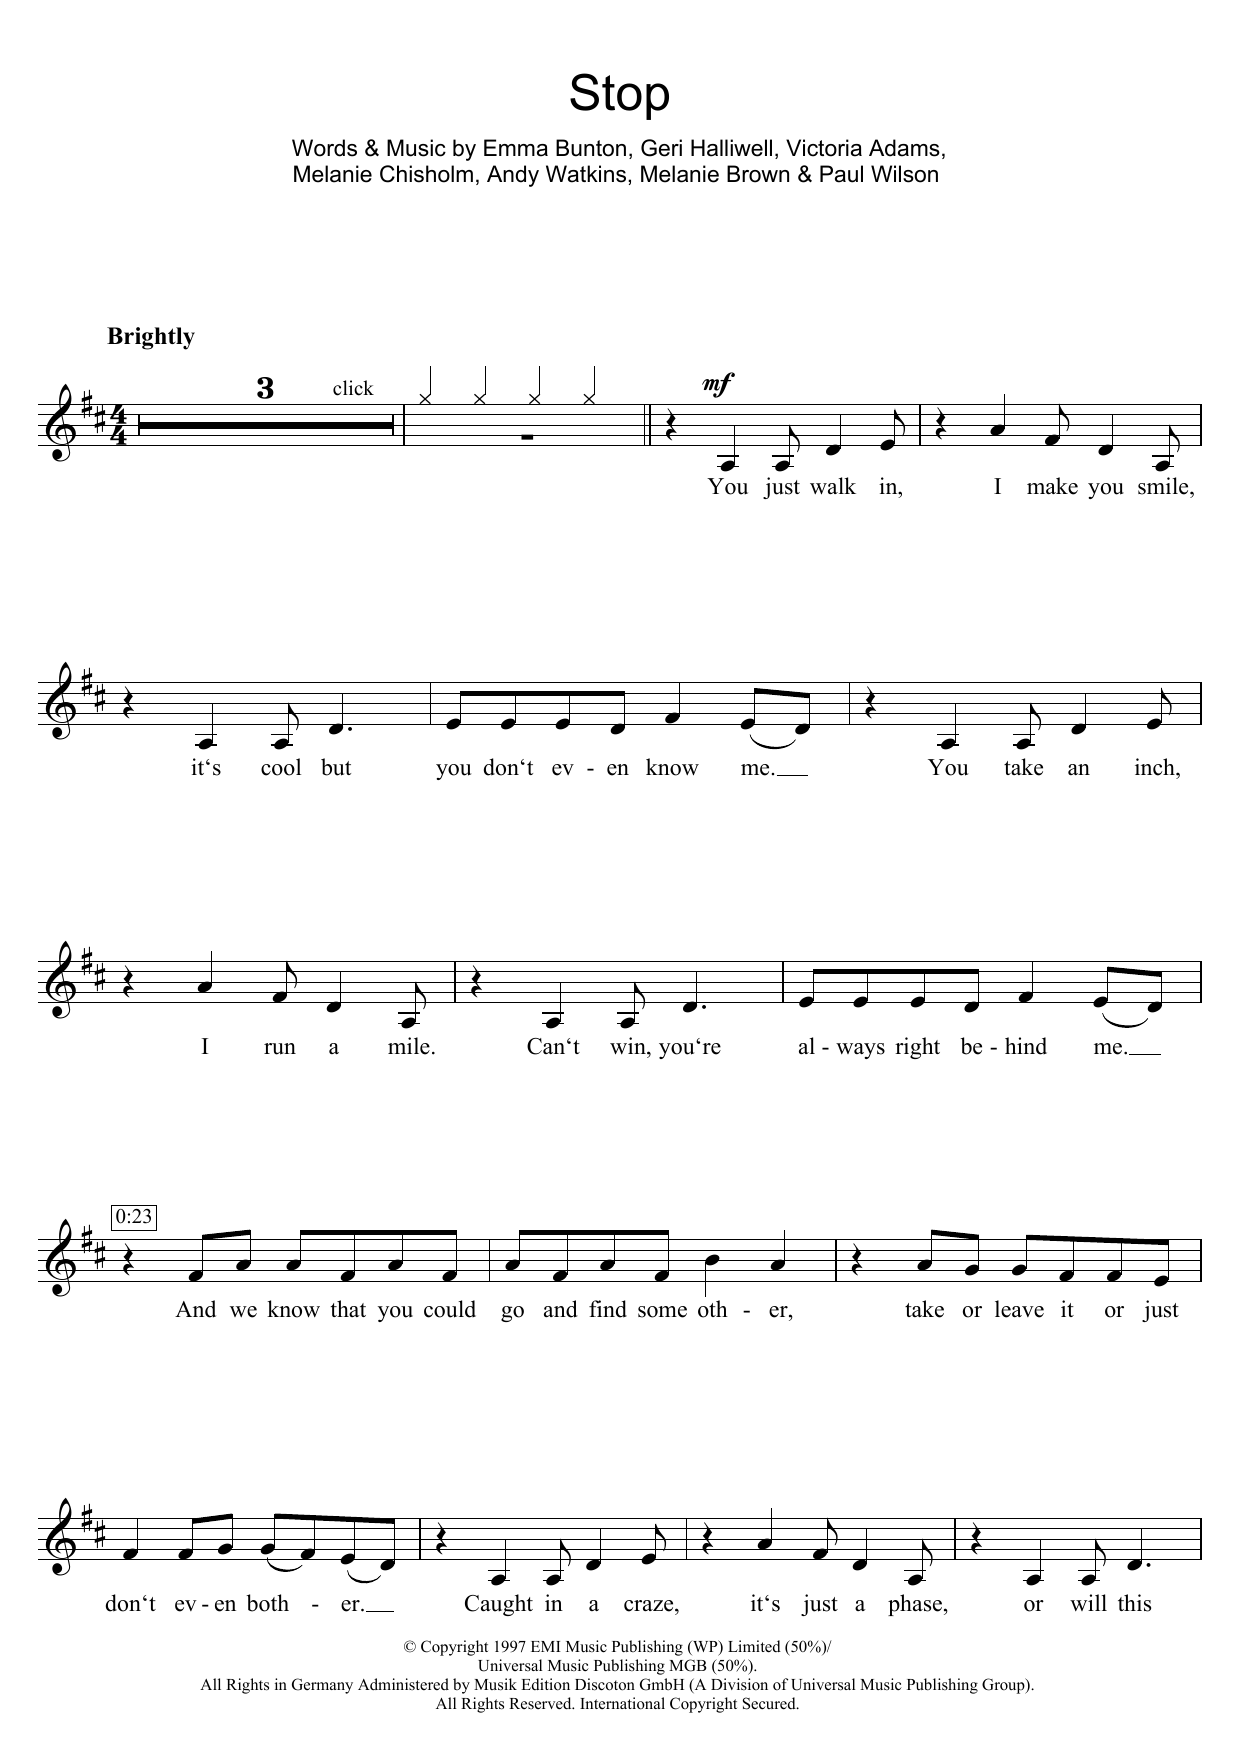 Download The Spice Girls Stop Sheet Music